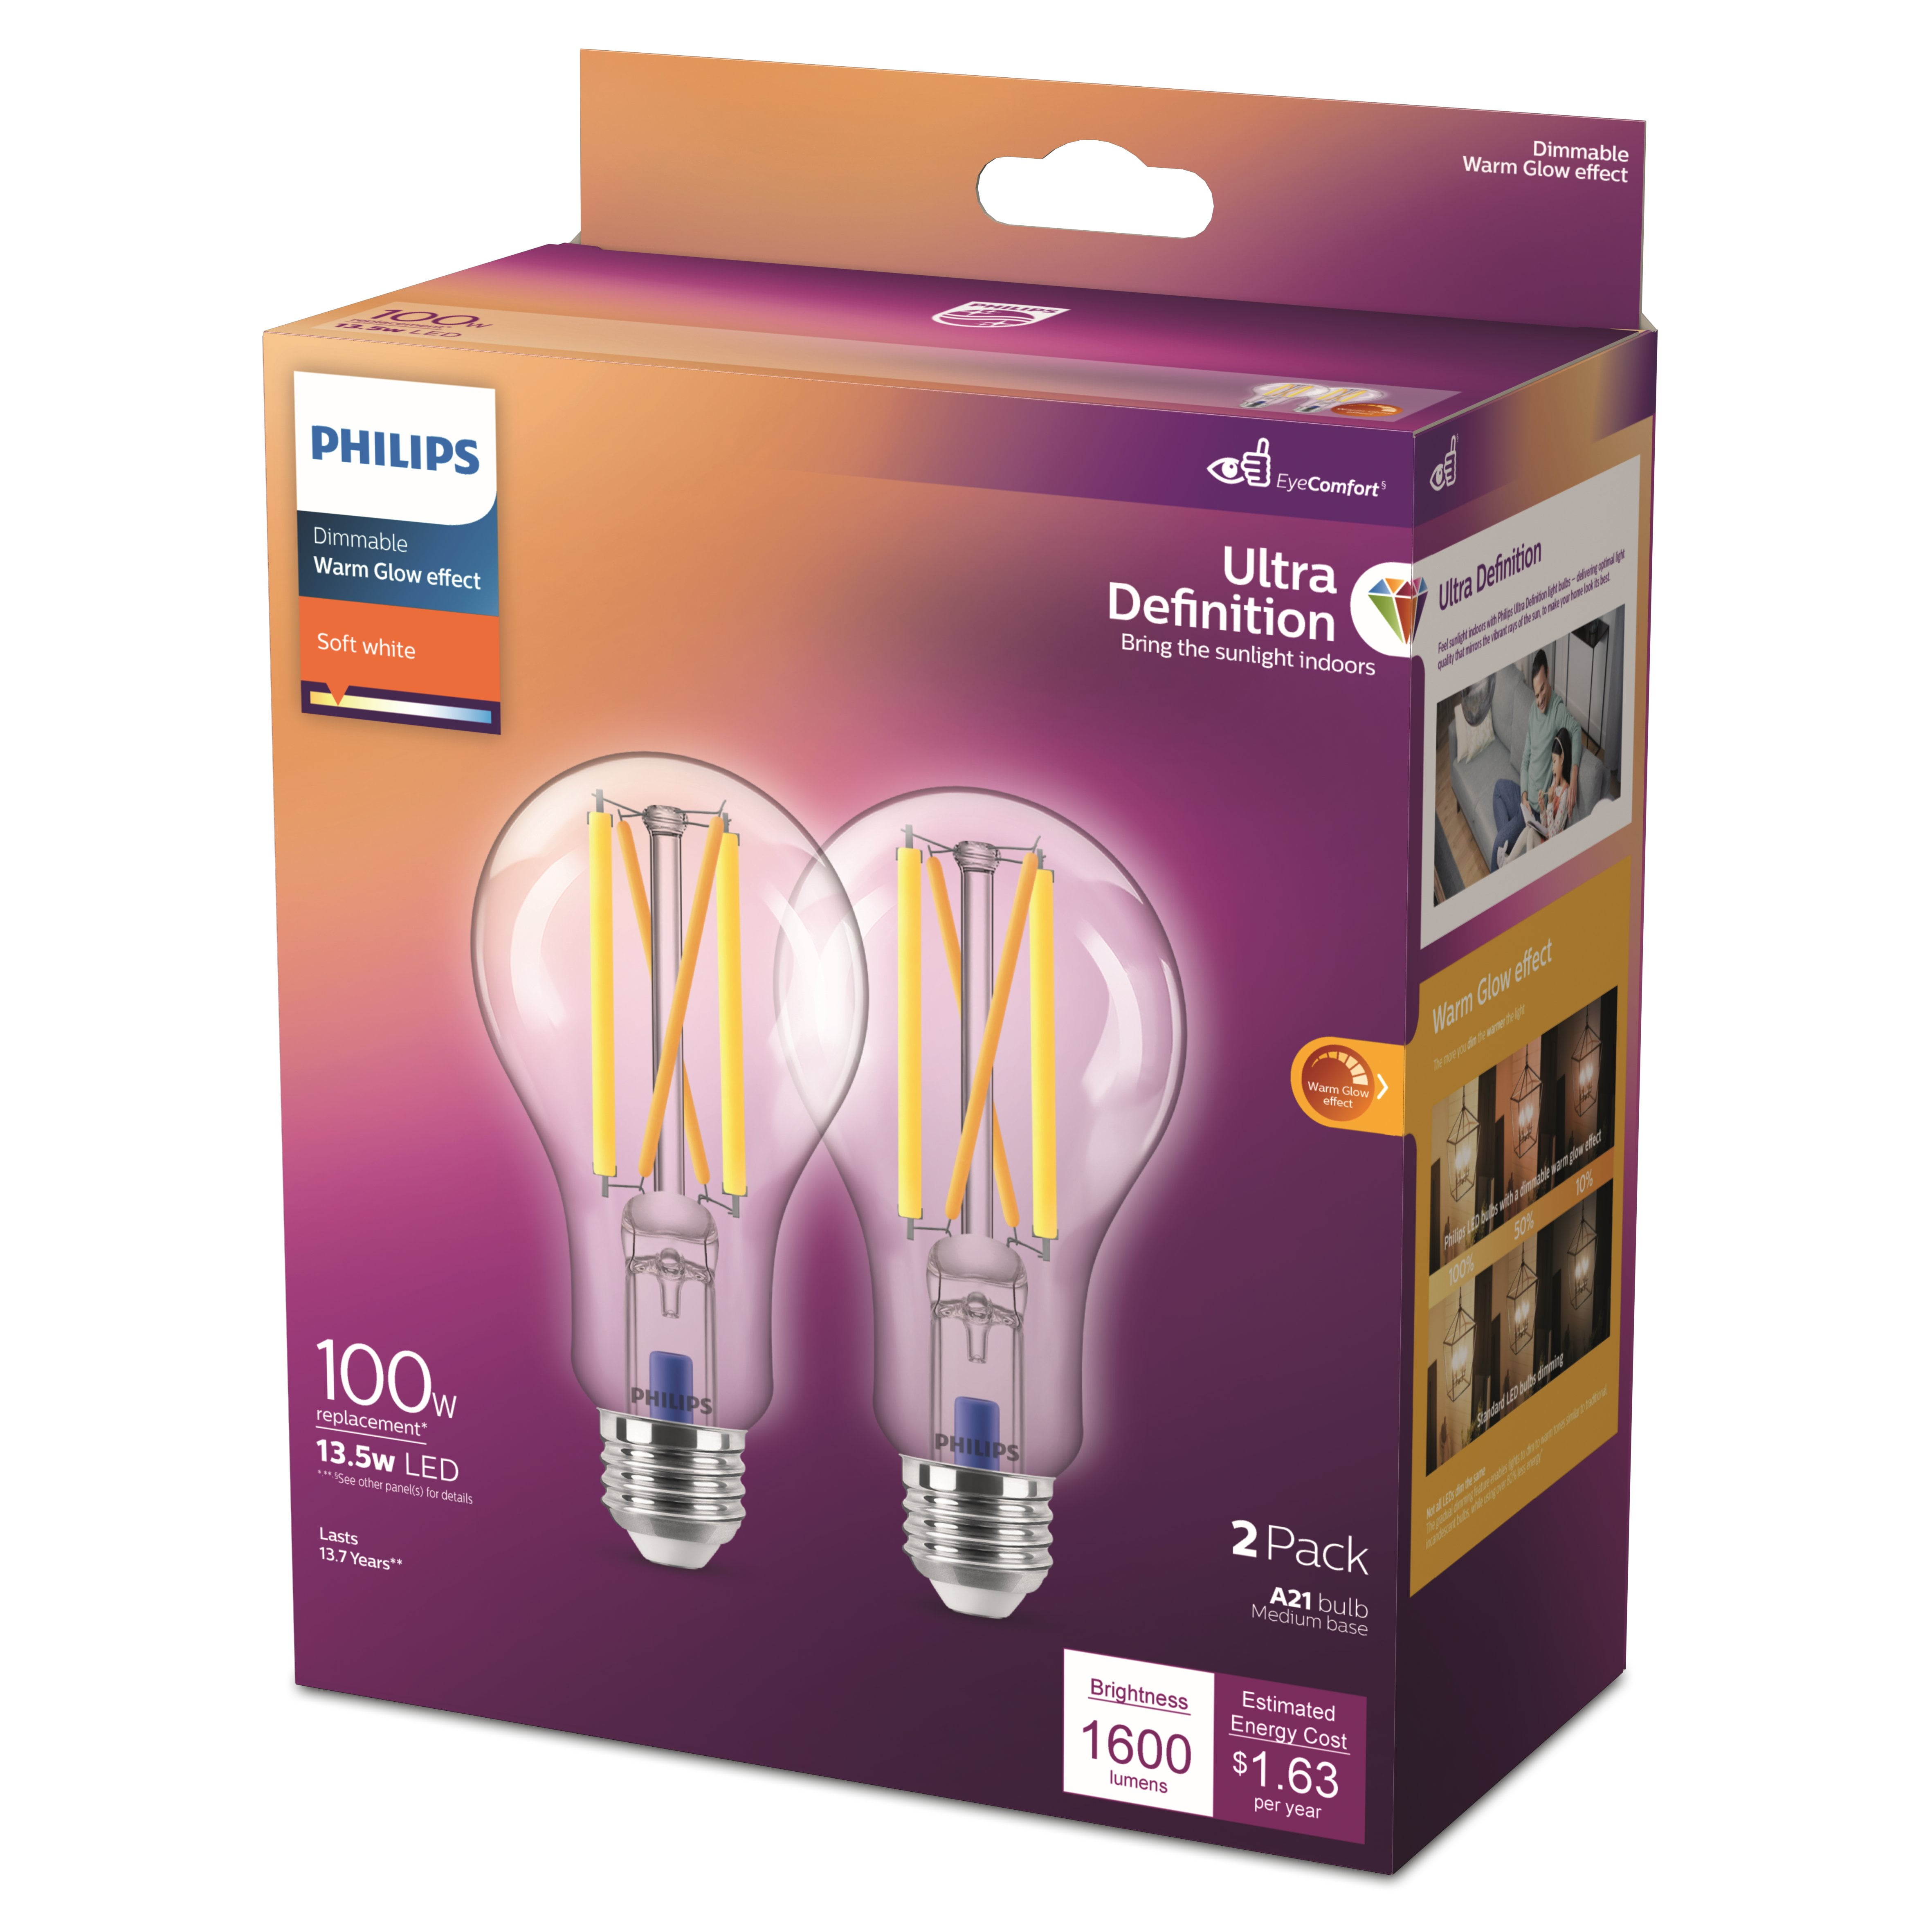 Philips Ultra Definition LED Filament Light Bulb, Clear Soft Dimmable, E26 Base (2-Pack) - Walmart.com